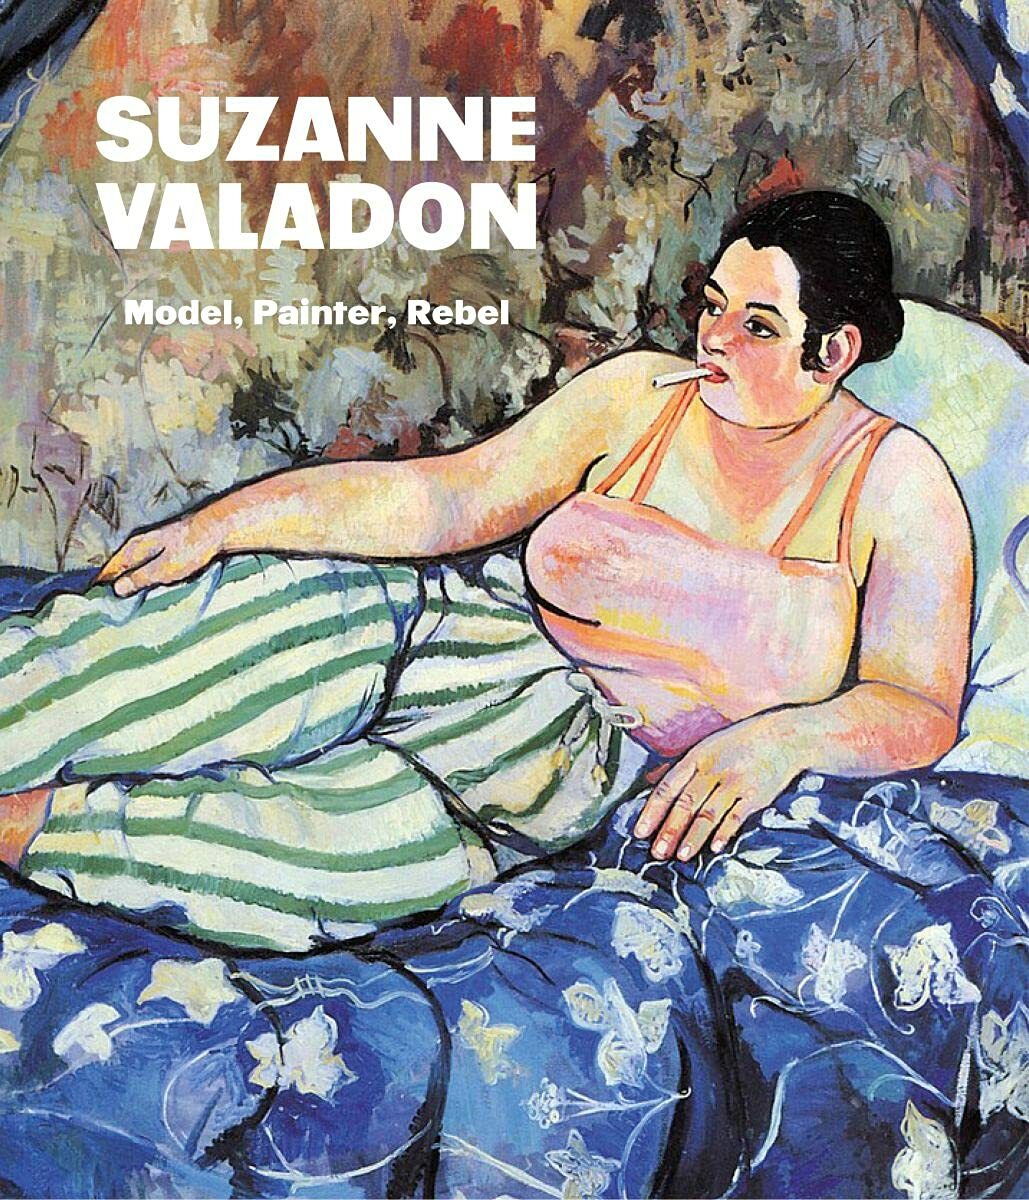 Book recommendation 🎨📖

Suzanne Valadon: Model, Painter, Rebel amzn.to/3EMbCBh